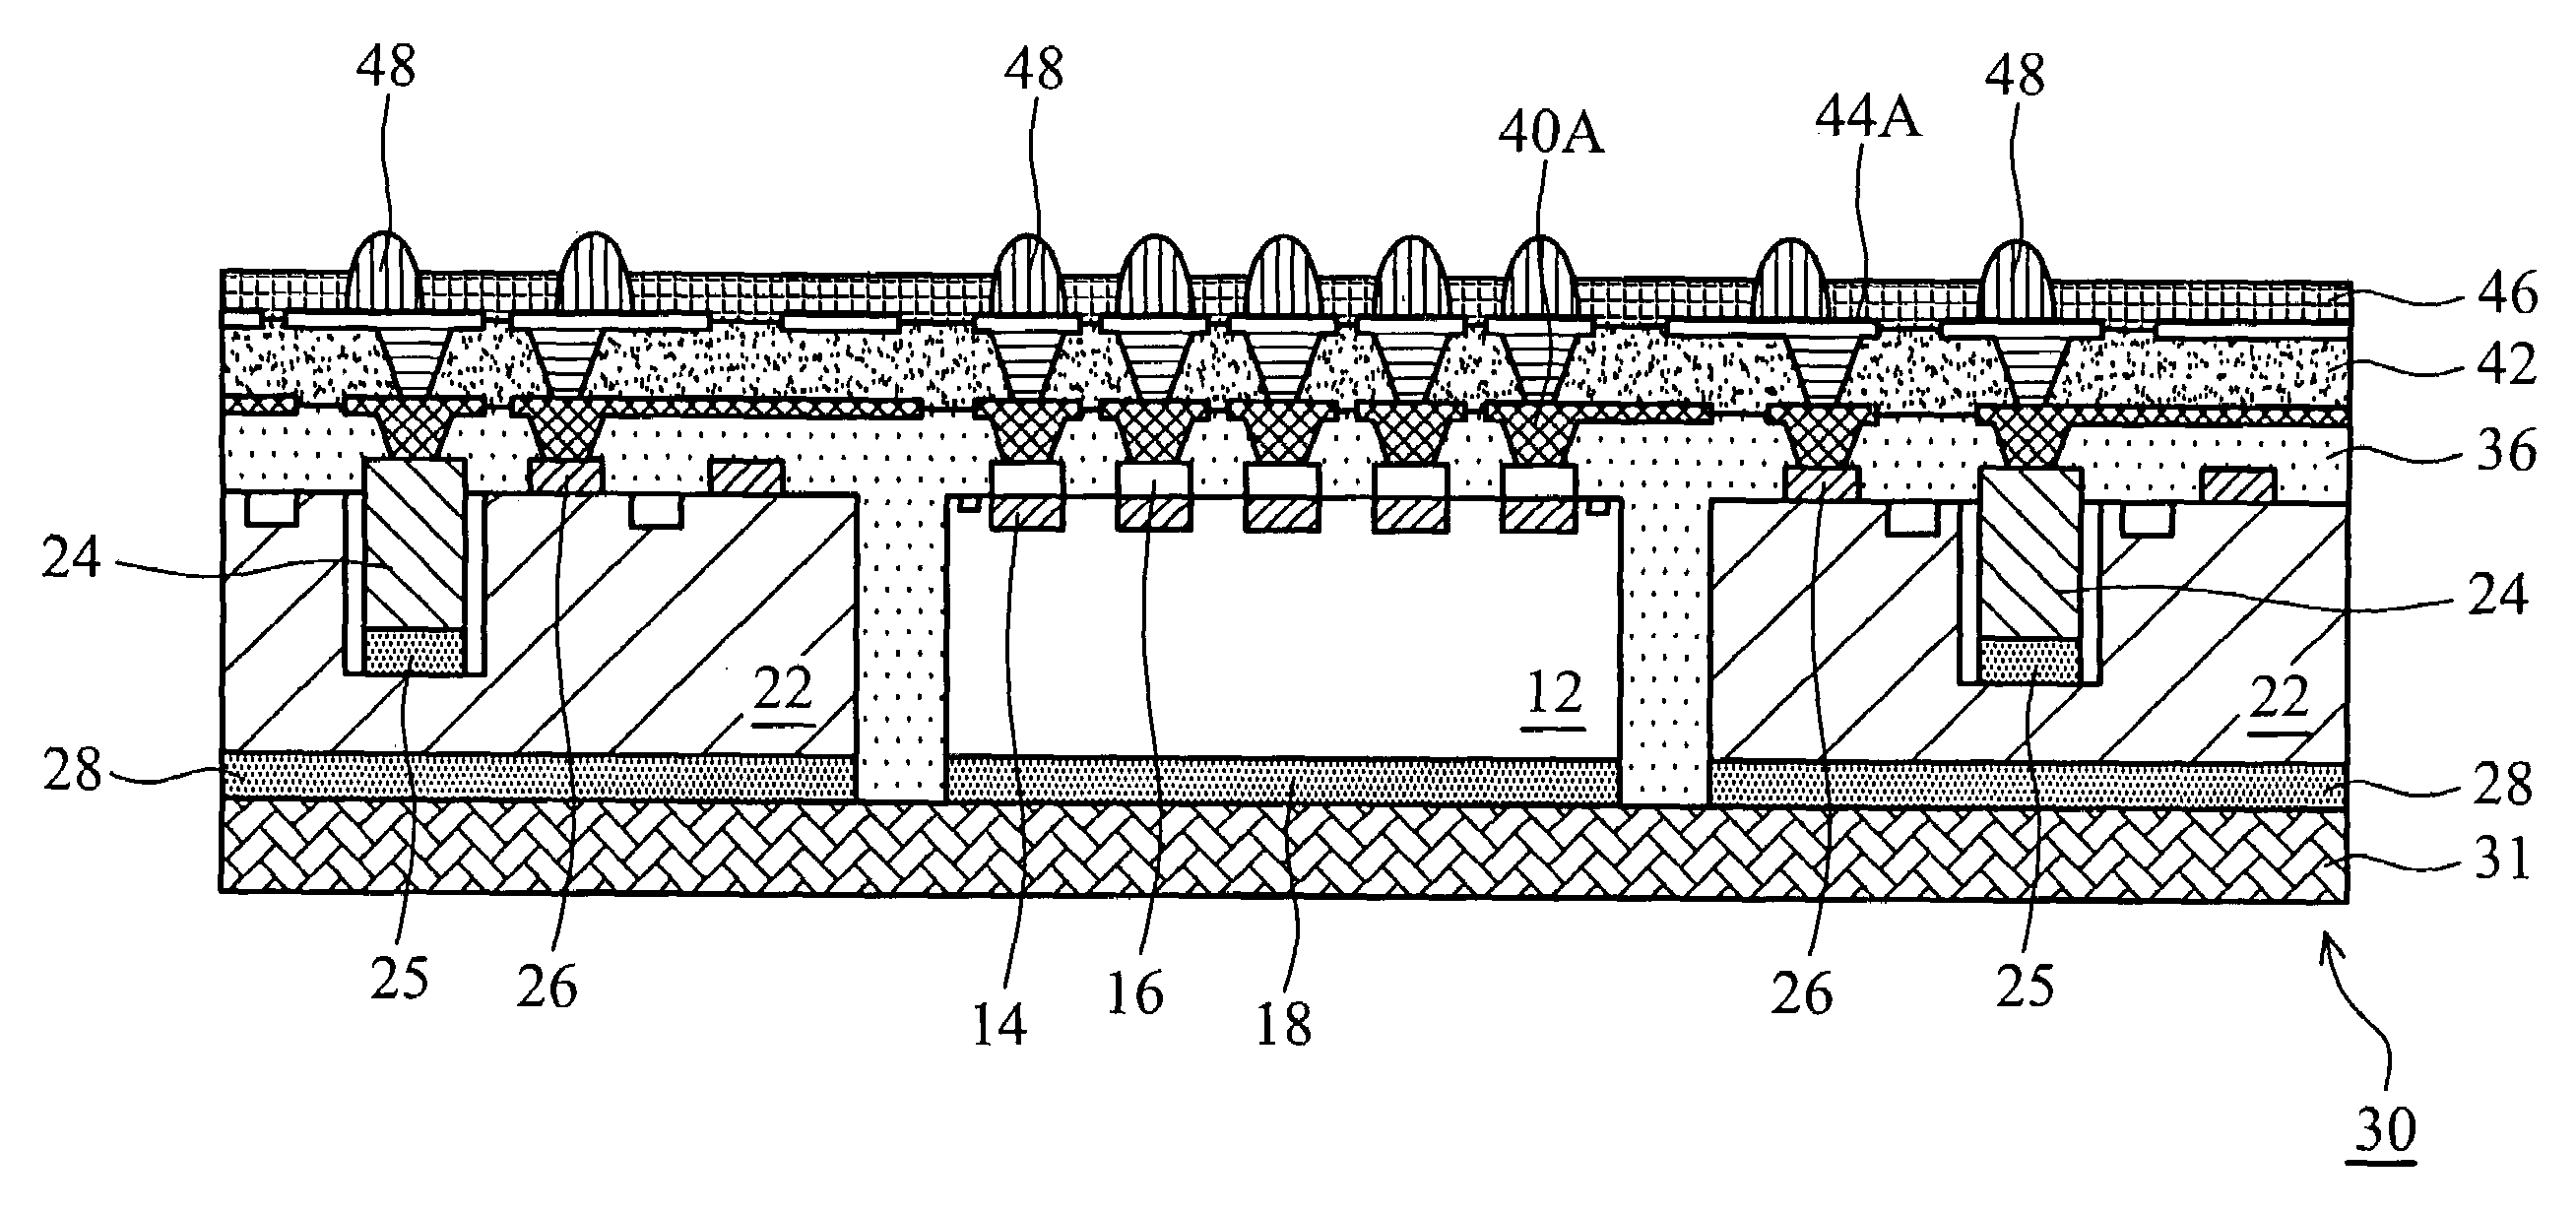 Module board having embedded chips and components and method of forming the same